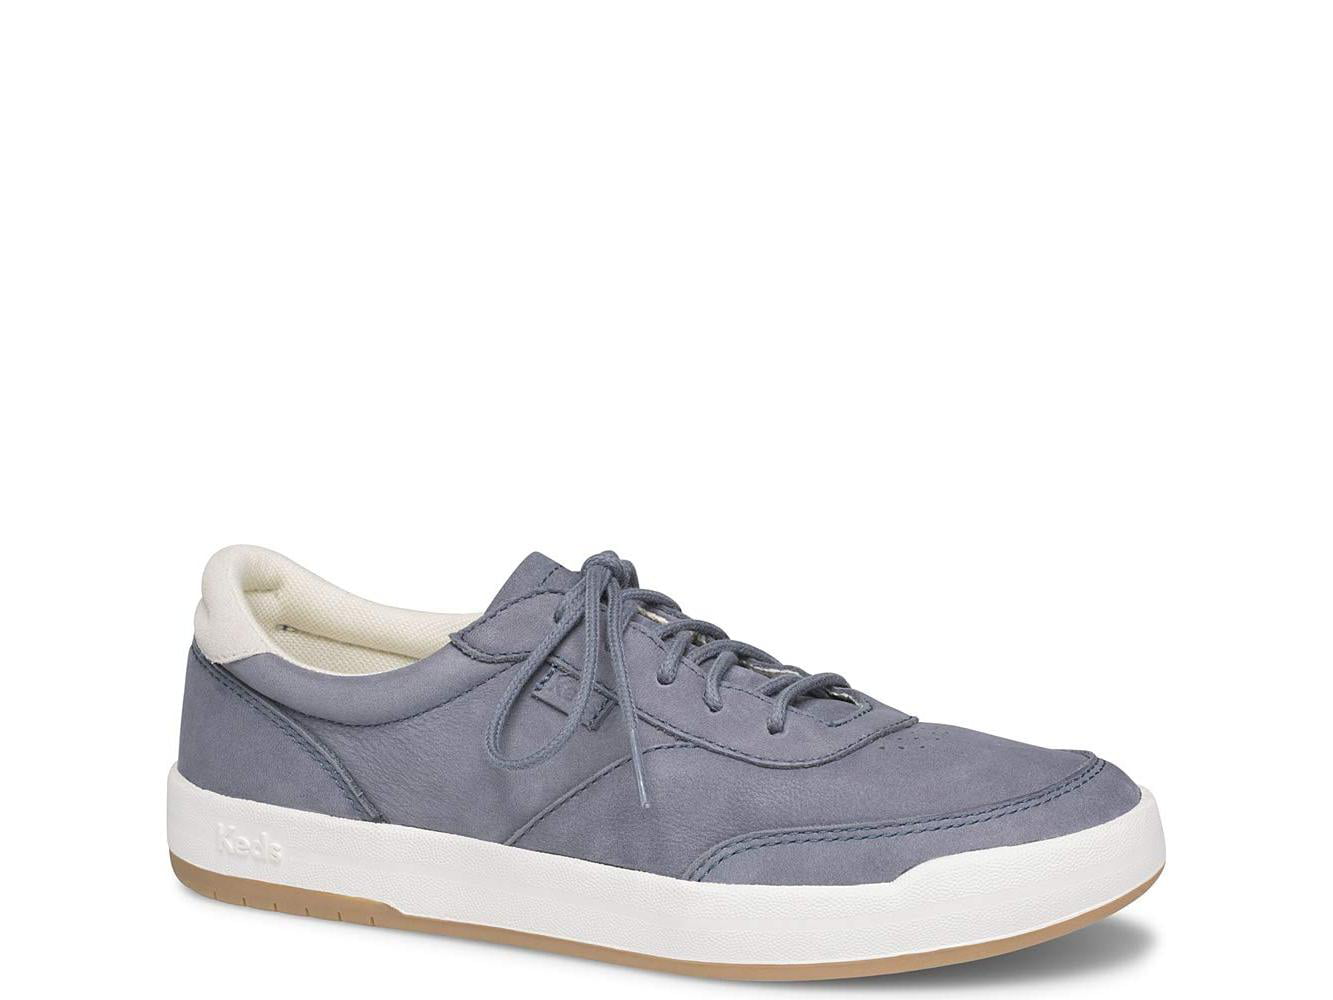 Keds Womens Match Point Leather Fashion Sneaker 